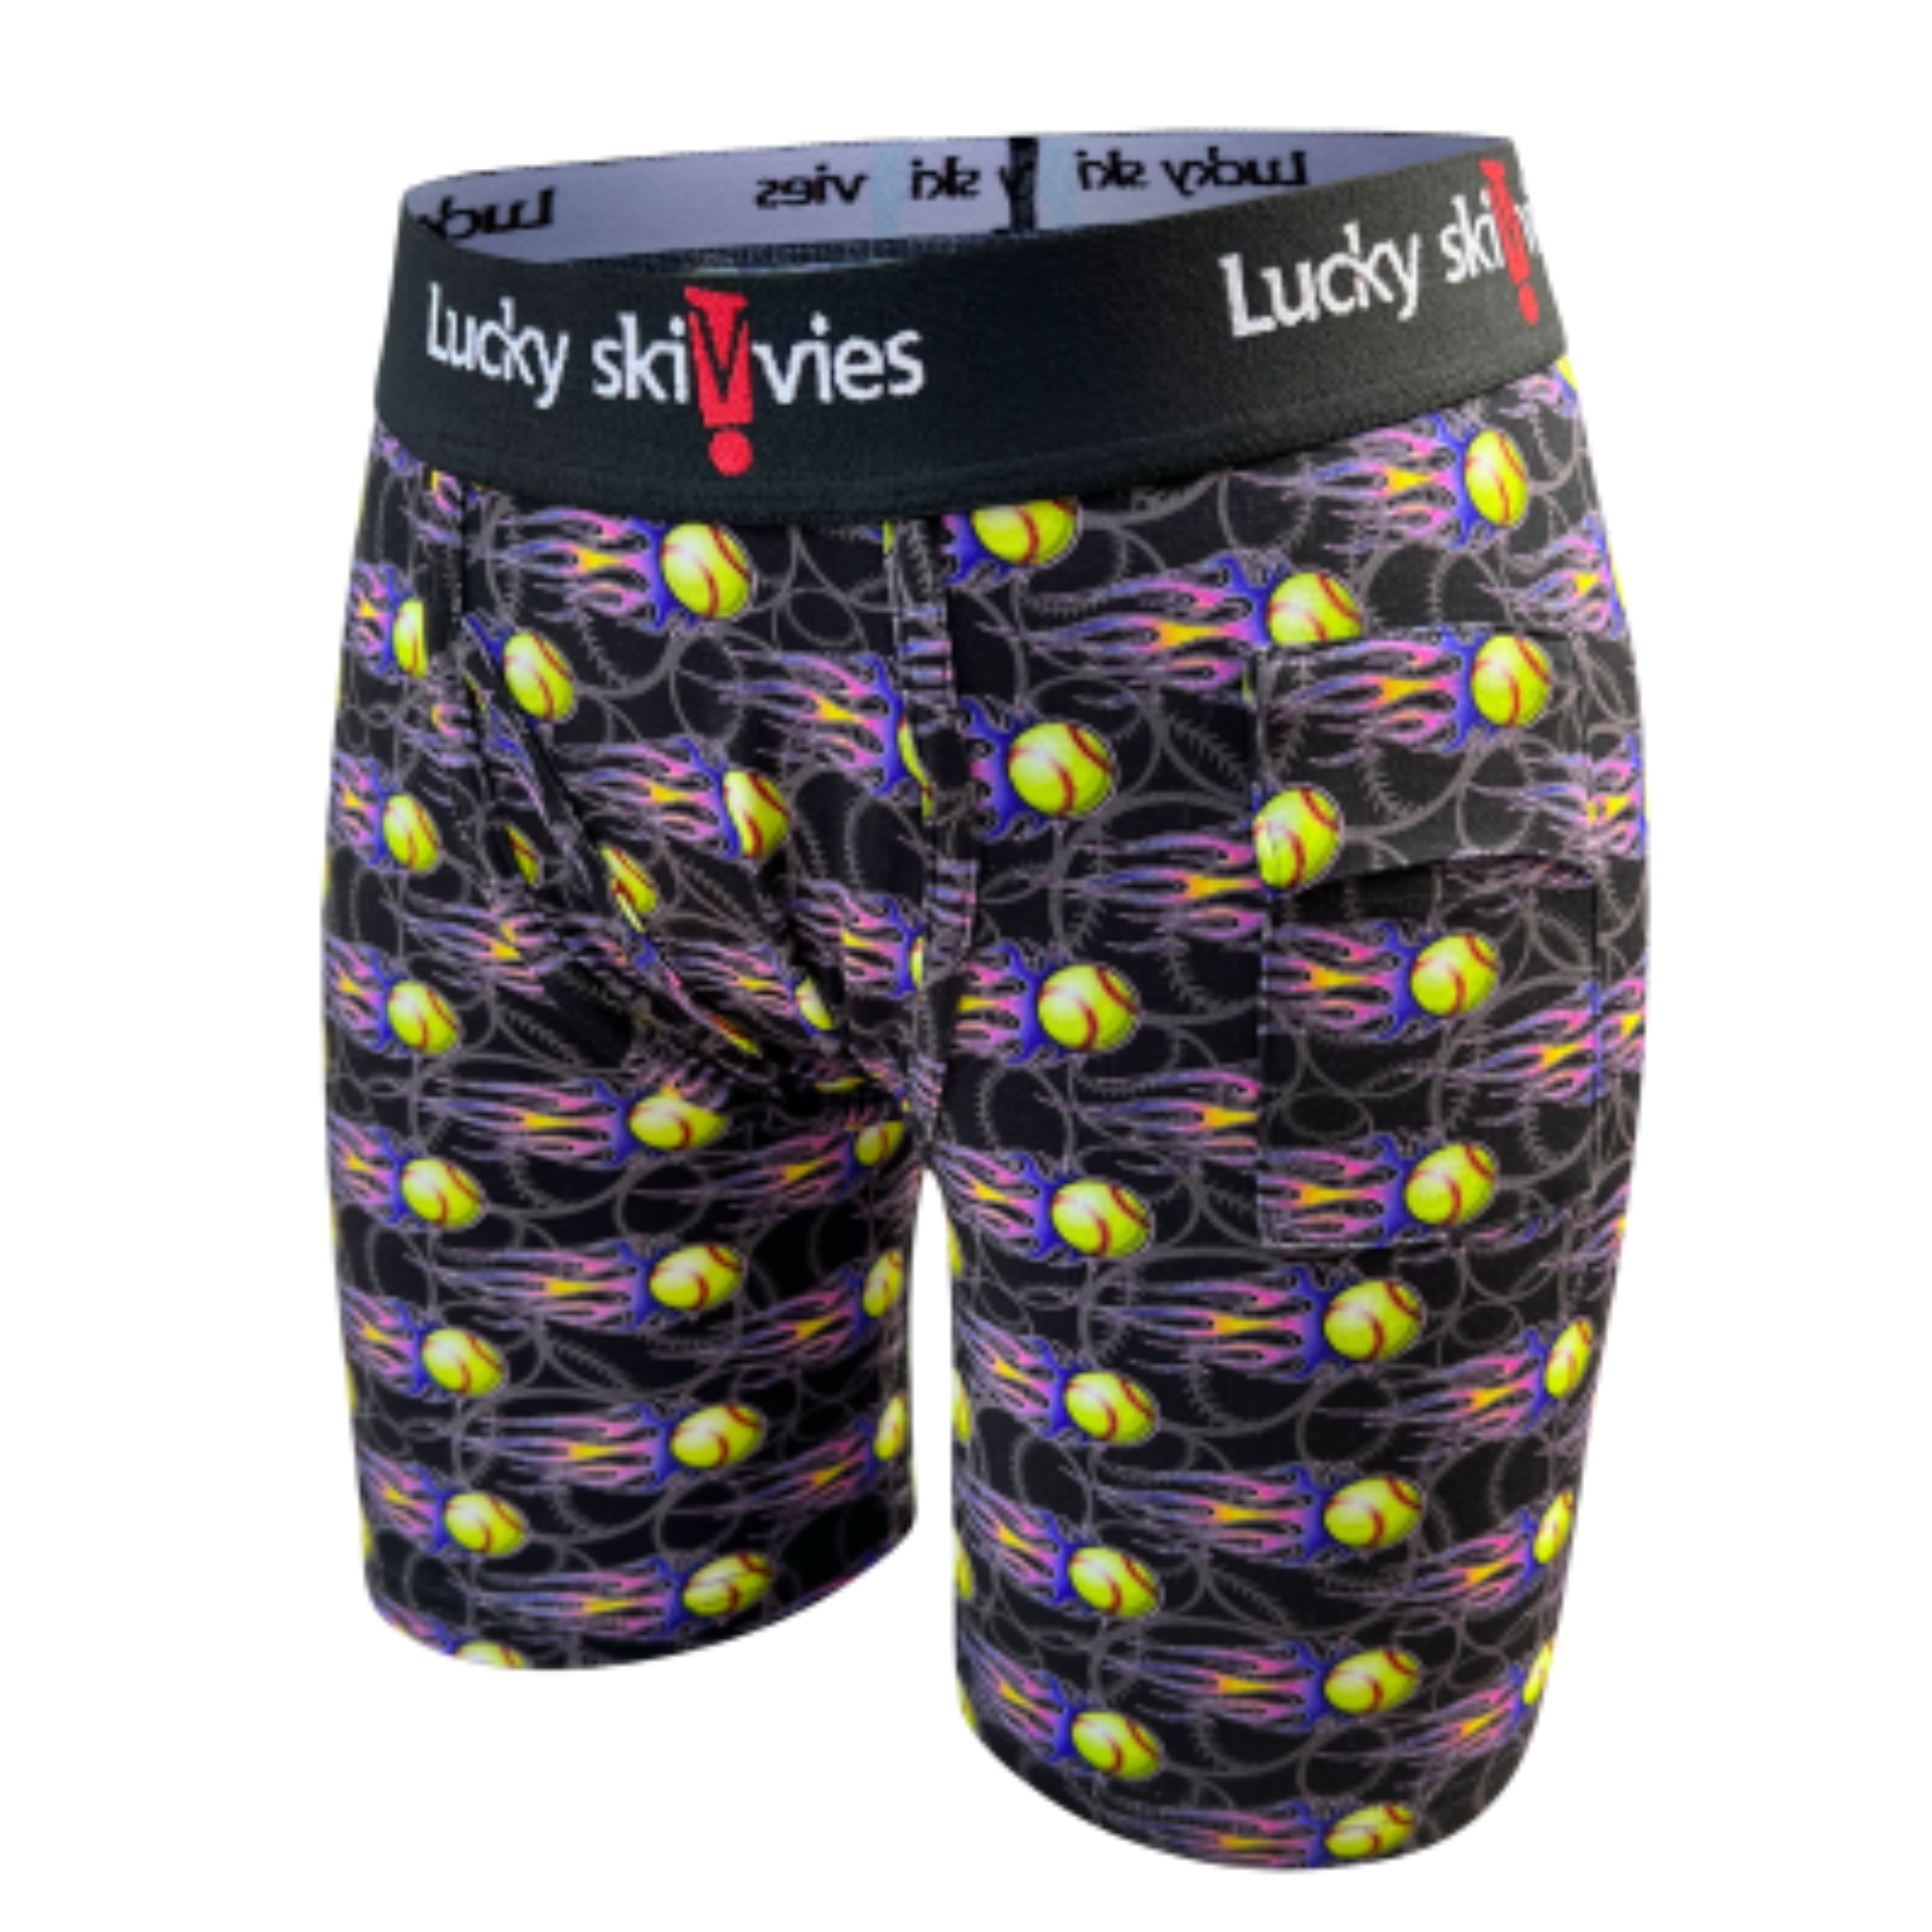 Flaming Softball Gender Neutral Boxer Briefs by Lucky Skivvies (Copy) –  Queer Collective